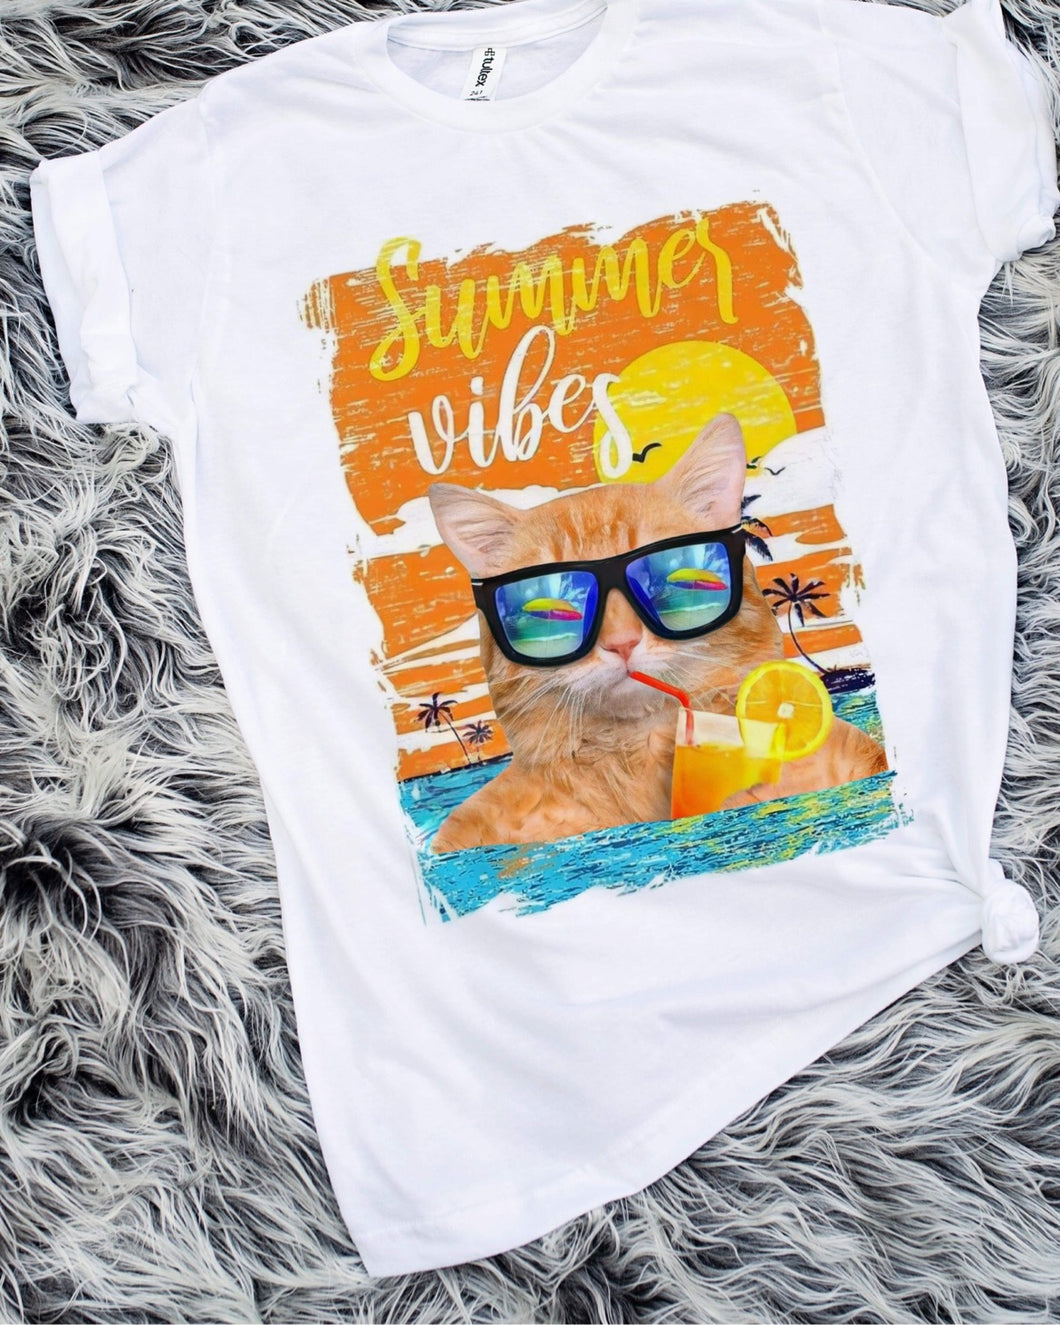 Summer Vibes Sublimation Transfer